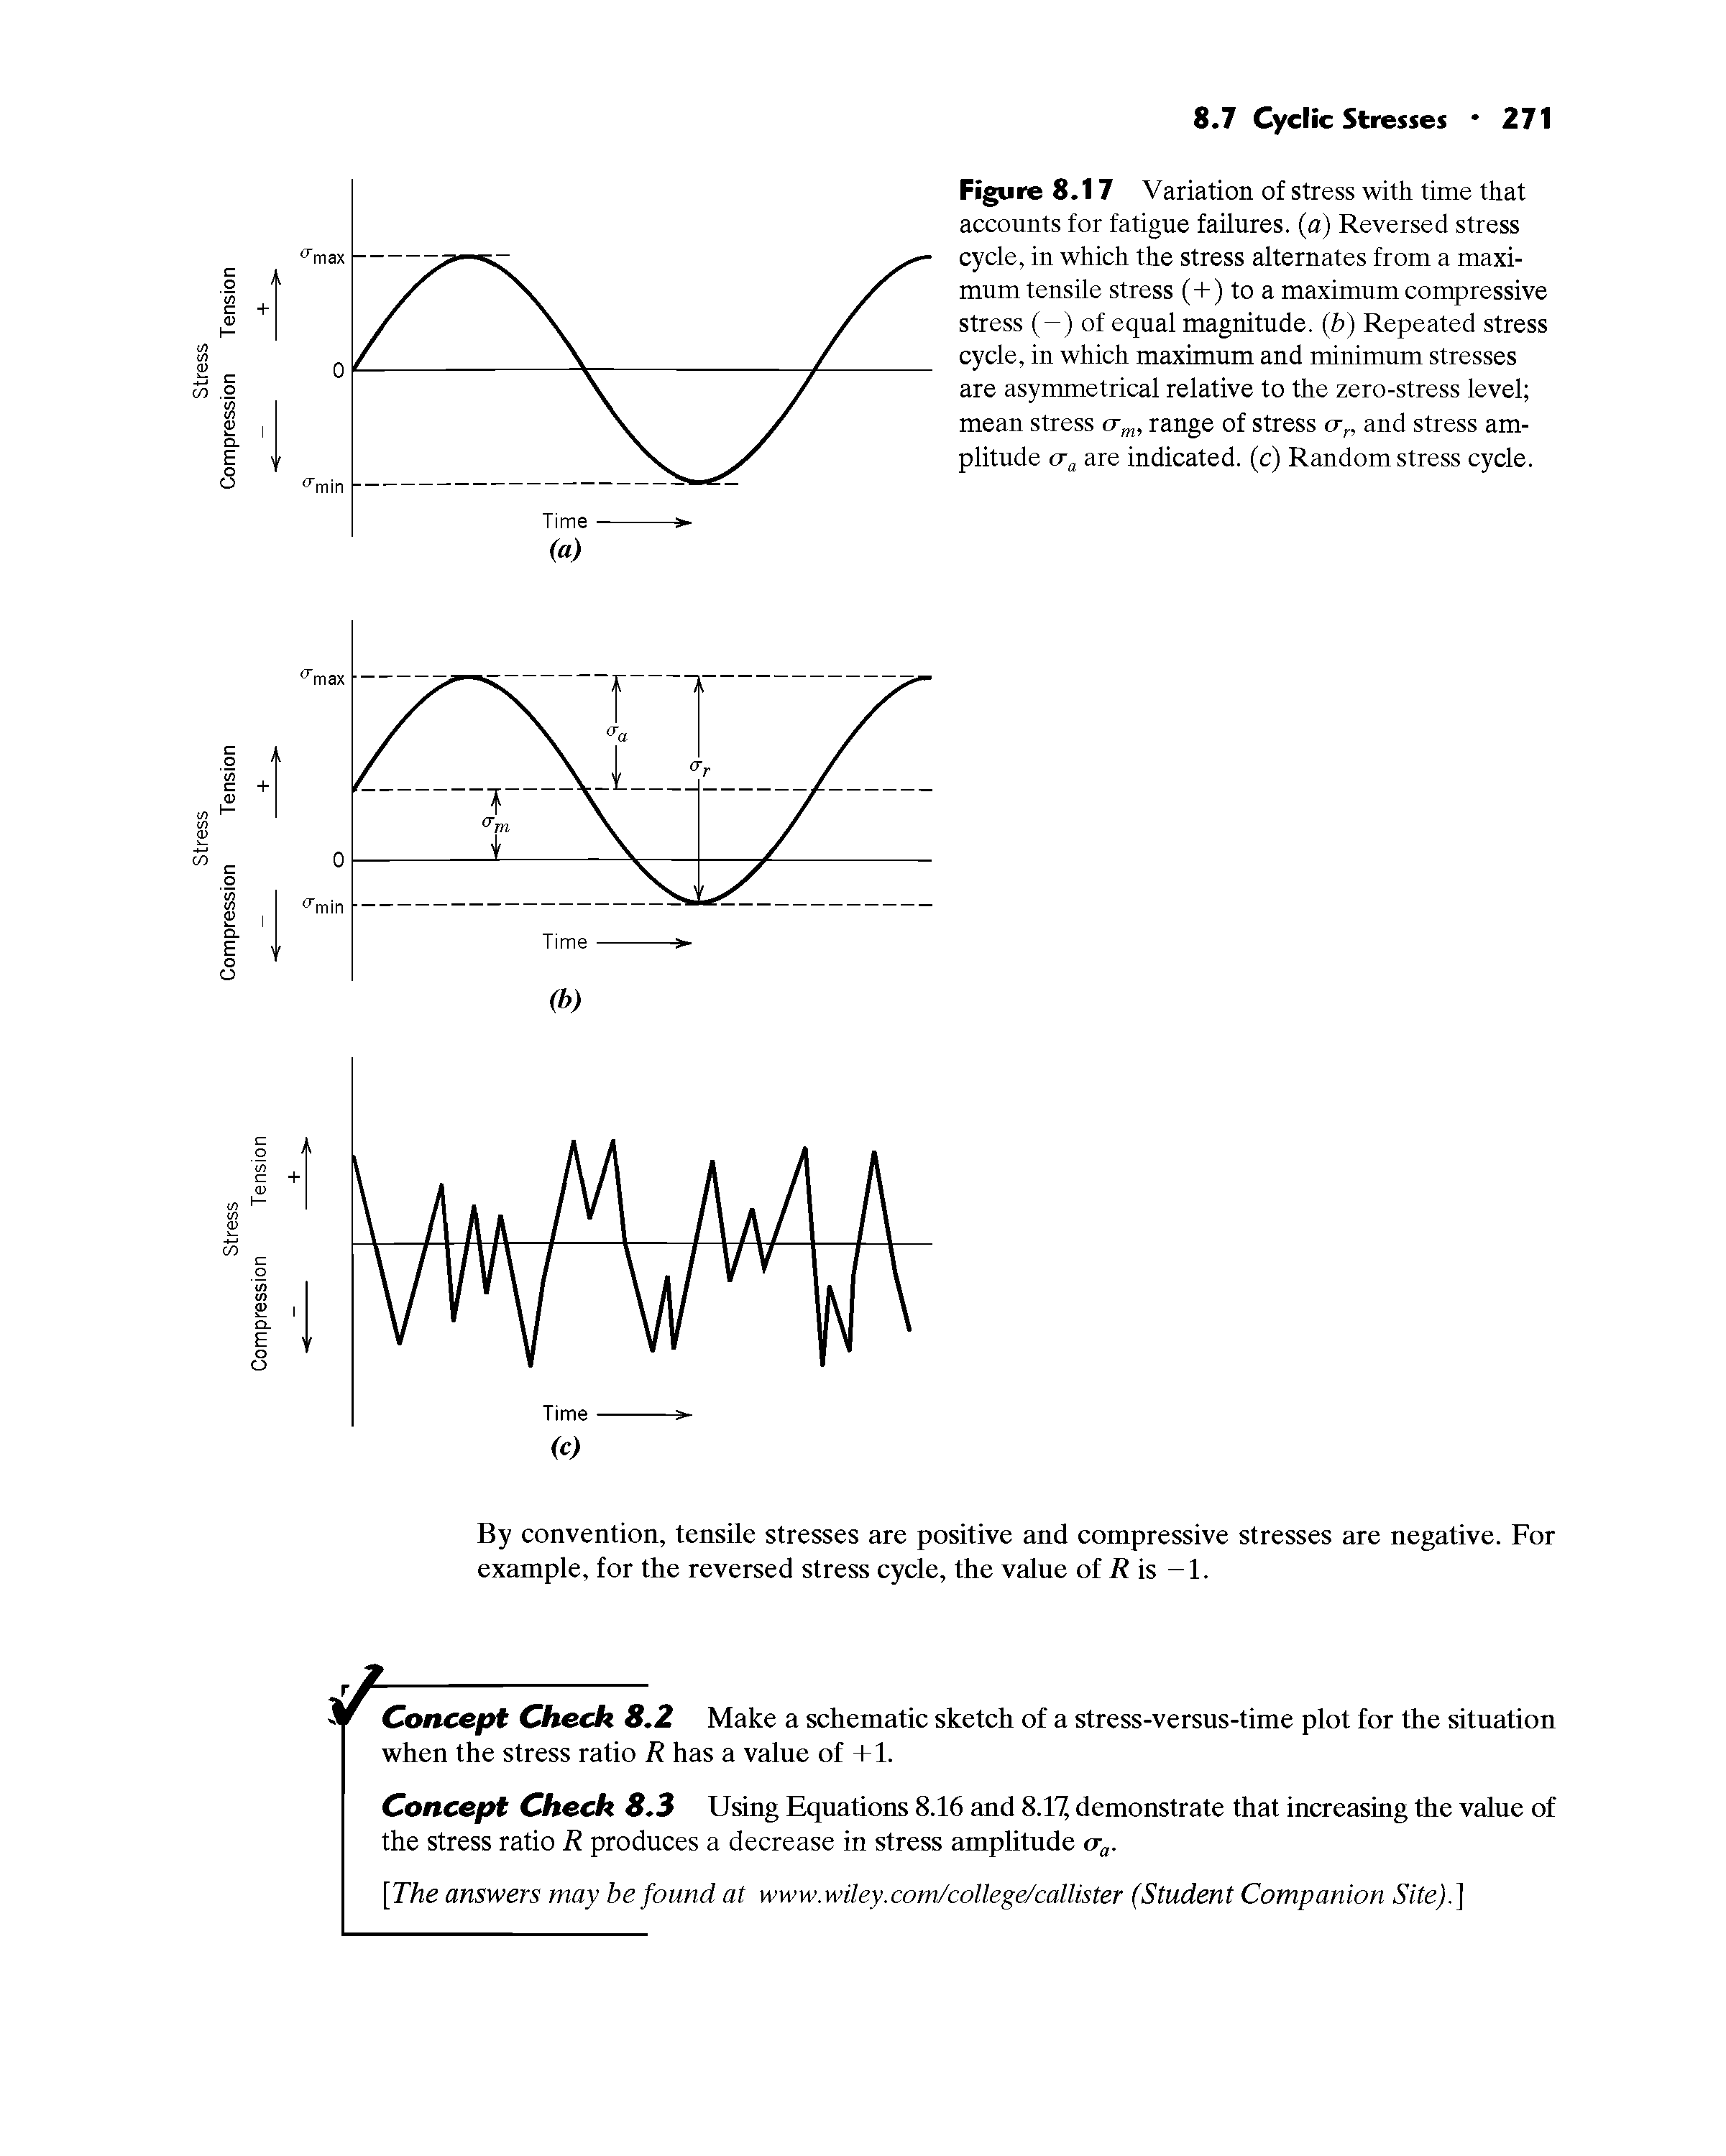 Figure 8.17 Variation of stress with time that accounts for fatigue failures, (a) Reversed stress cycle, in which the stress alternates from a maximum tensile stress (+) to a maximum compressive stress (-) of equal magnitude, (b) Repeated stress cycle, in which maximum and minimum stresses are asymmetrical relative to the zero-stress level mean stress cr, range of stress cr and stress amplitude cr are indicated, (c) Random stress cycle.